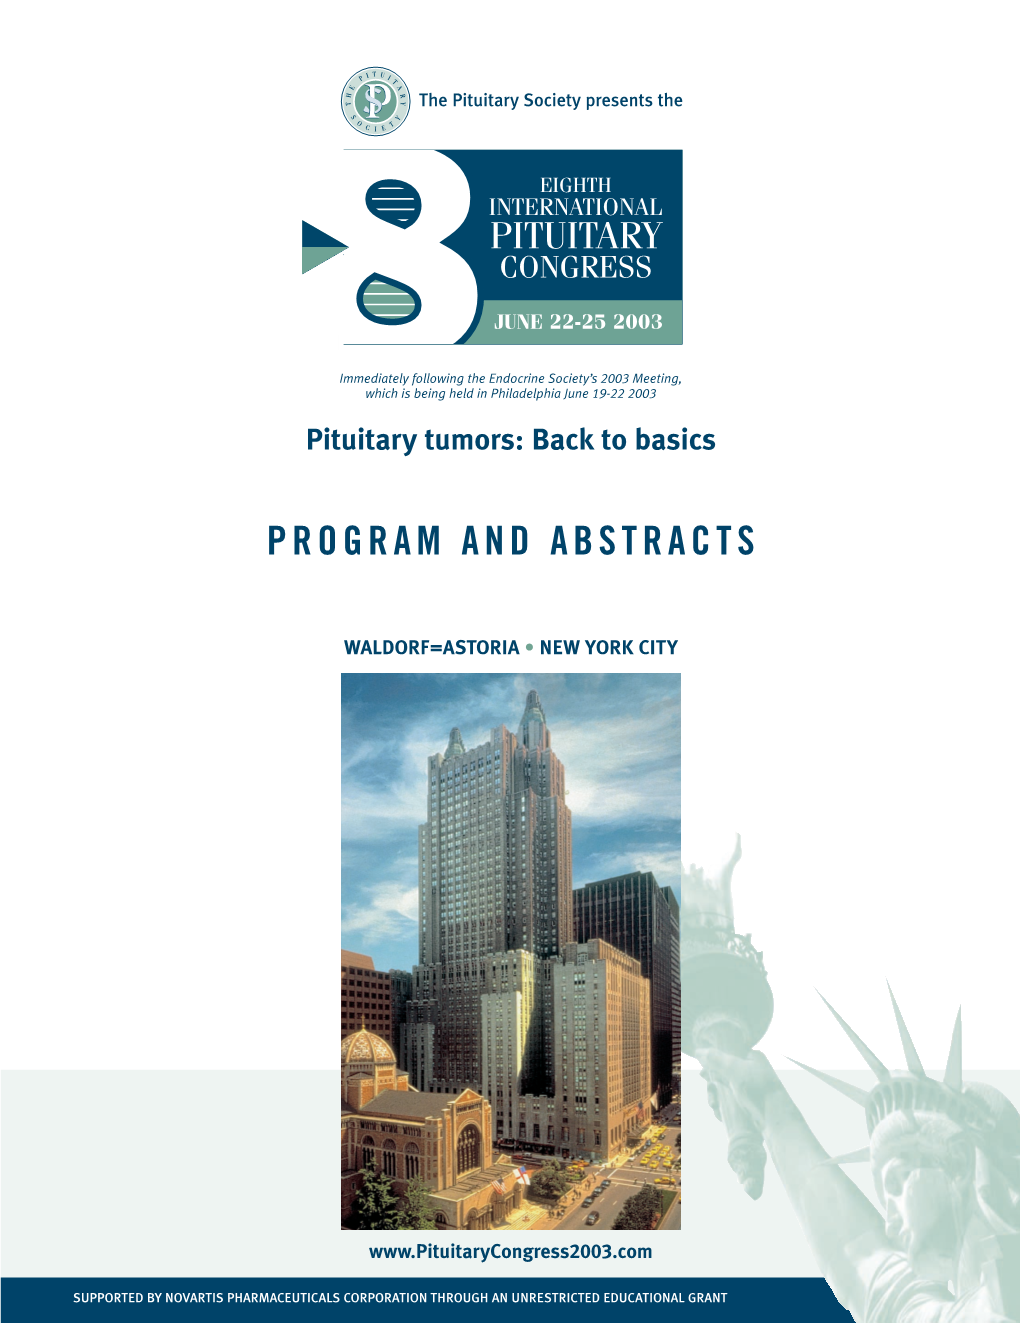 8Th International Pituitary Congress Will Be Held in New York City from June 22 Through June 25, Immediately Following the ENDO 2003 Meeting in Philadelphia